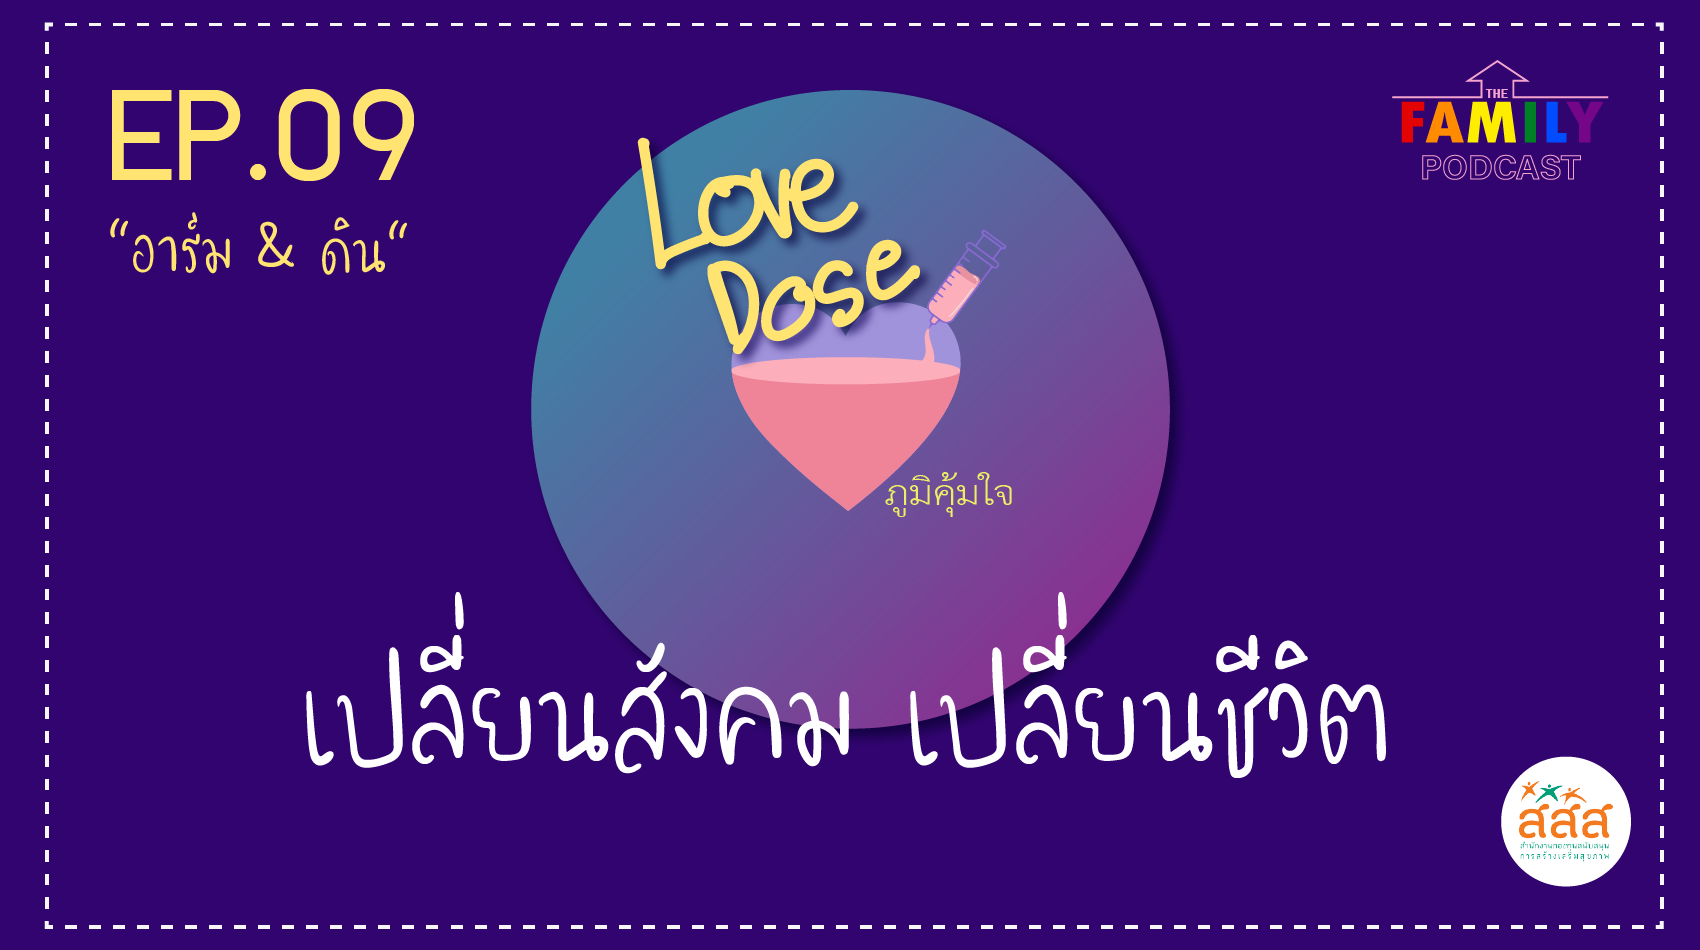 The Family Podcast Love Dose EP.09 เปลี่ยนสังคม เปลี่ยนชีวิต